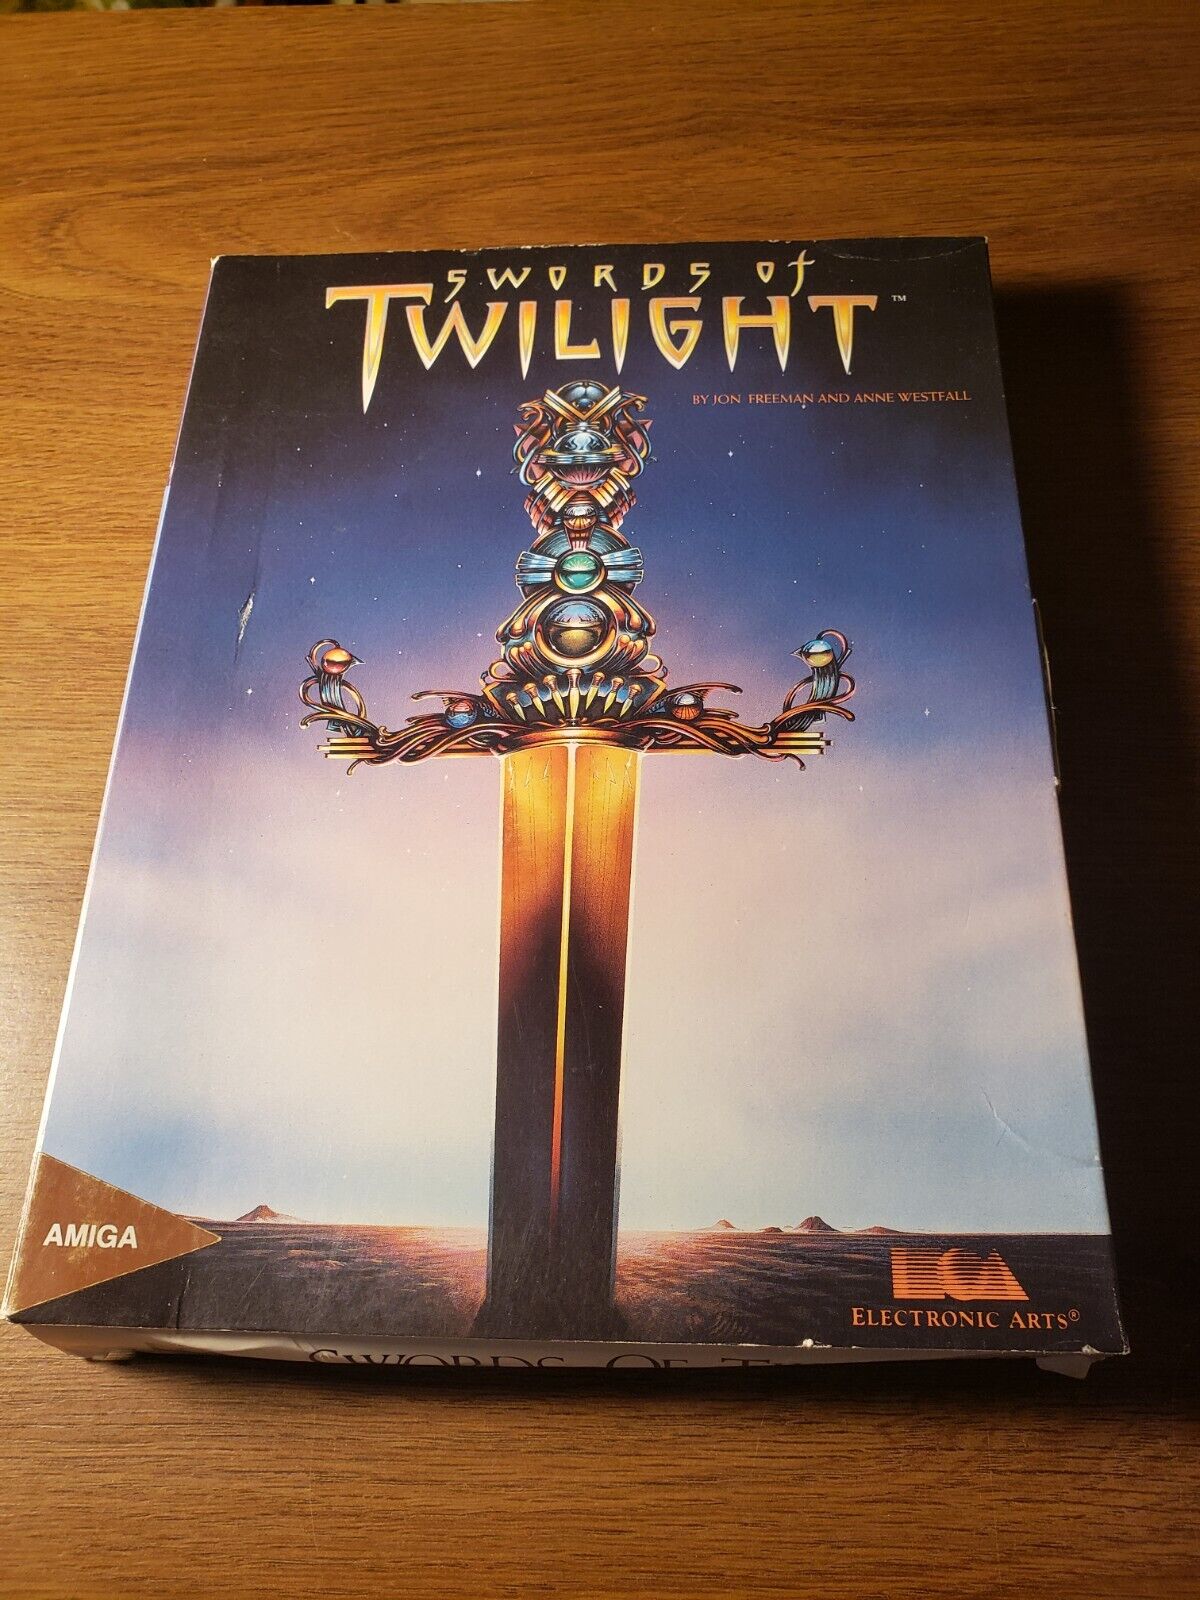 RARE Swords of Twilight by Electronic Arts for Amiga 3.5” Disks in Box 1989